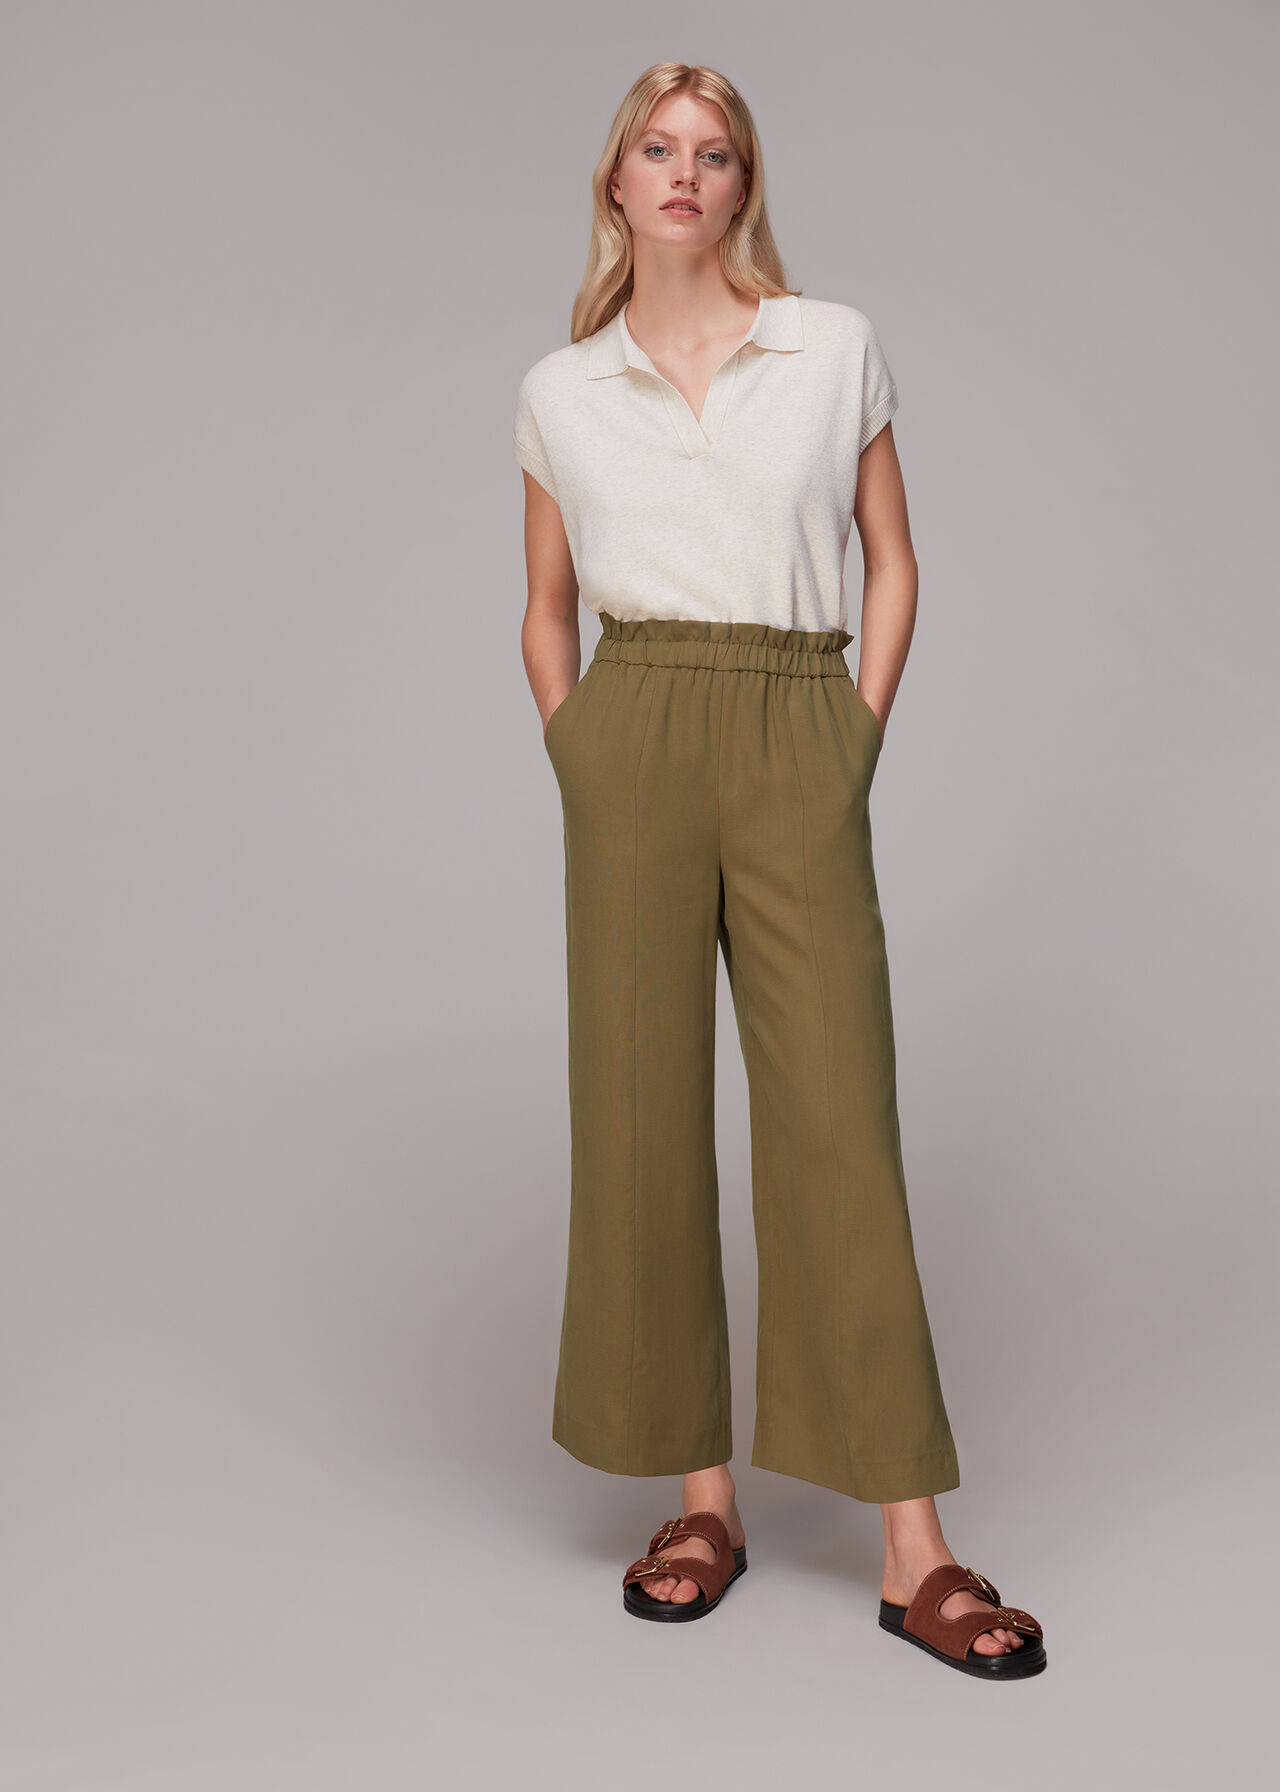 What kind of shoes do you wear with wide leg pants? - Quora